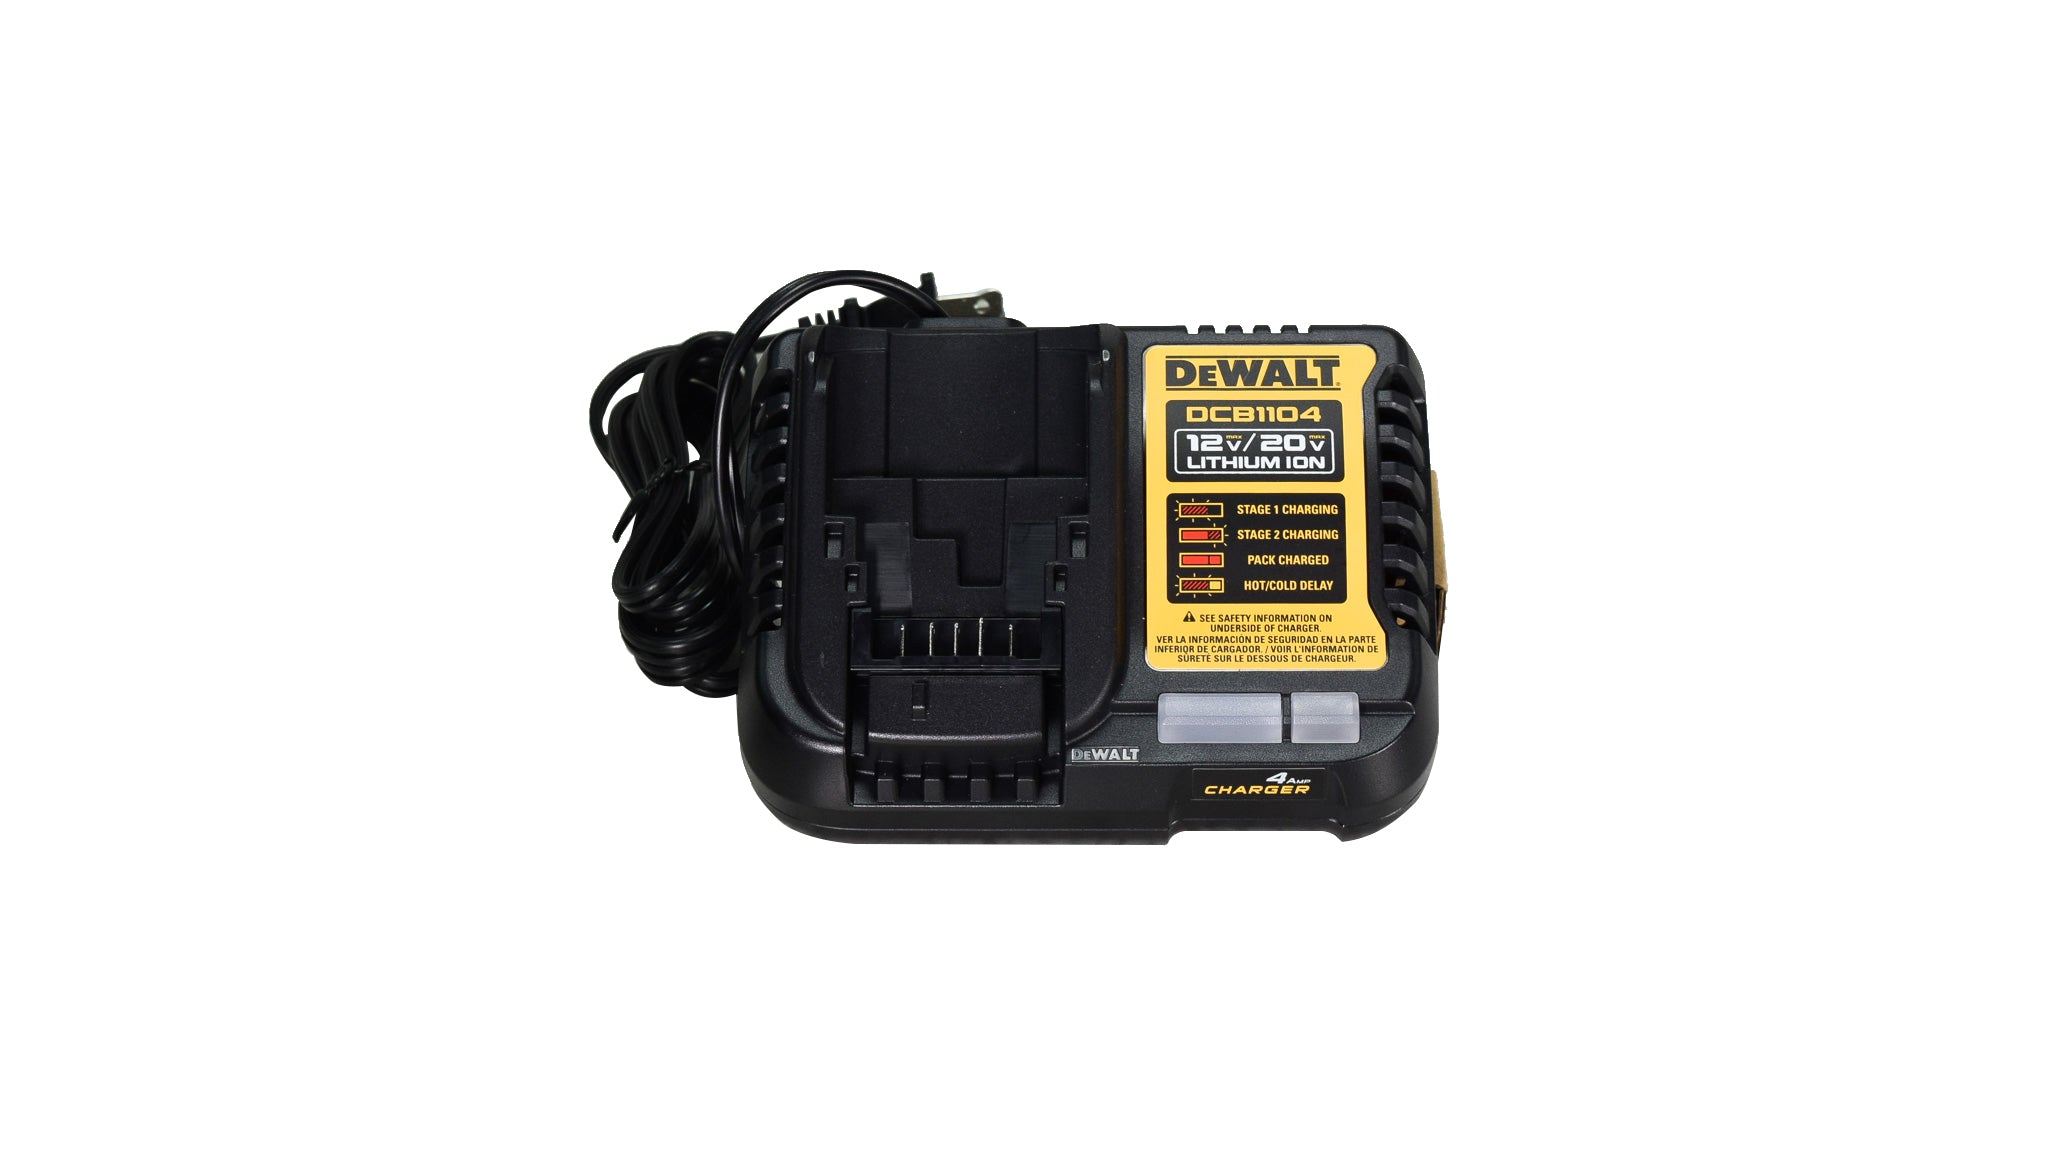 DeWalt DCH273H1 20V Cordless Brushless SDS 1" Rotary Hammer Kit with 5.0Ah Battery and Charger